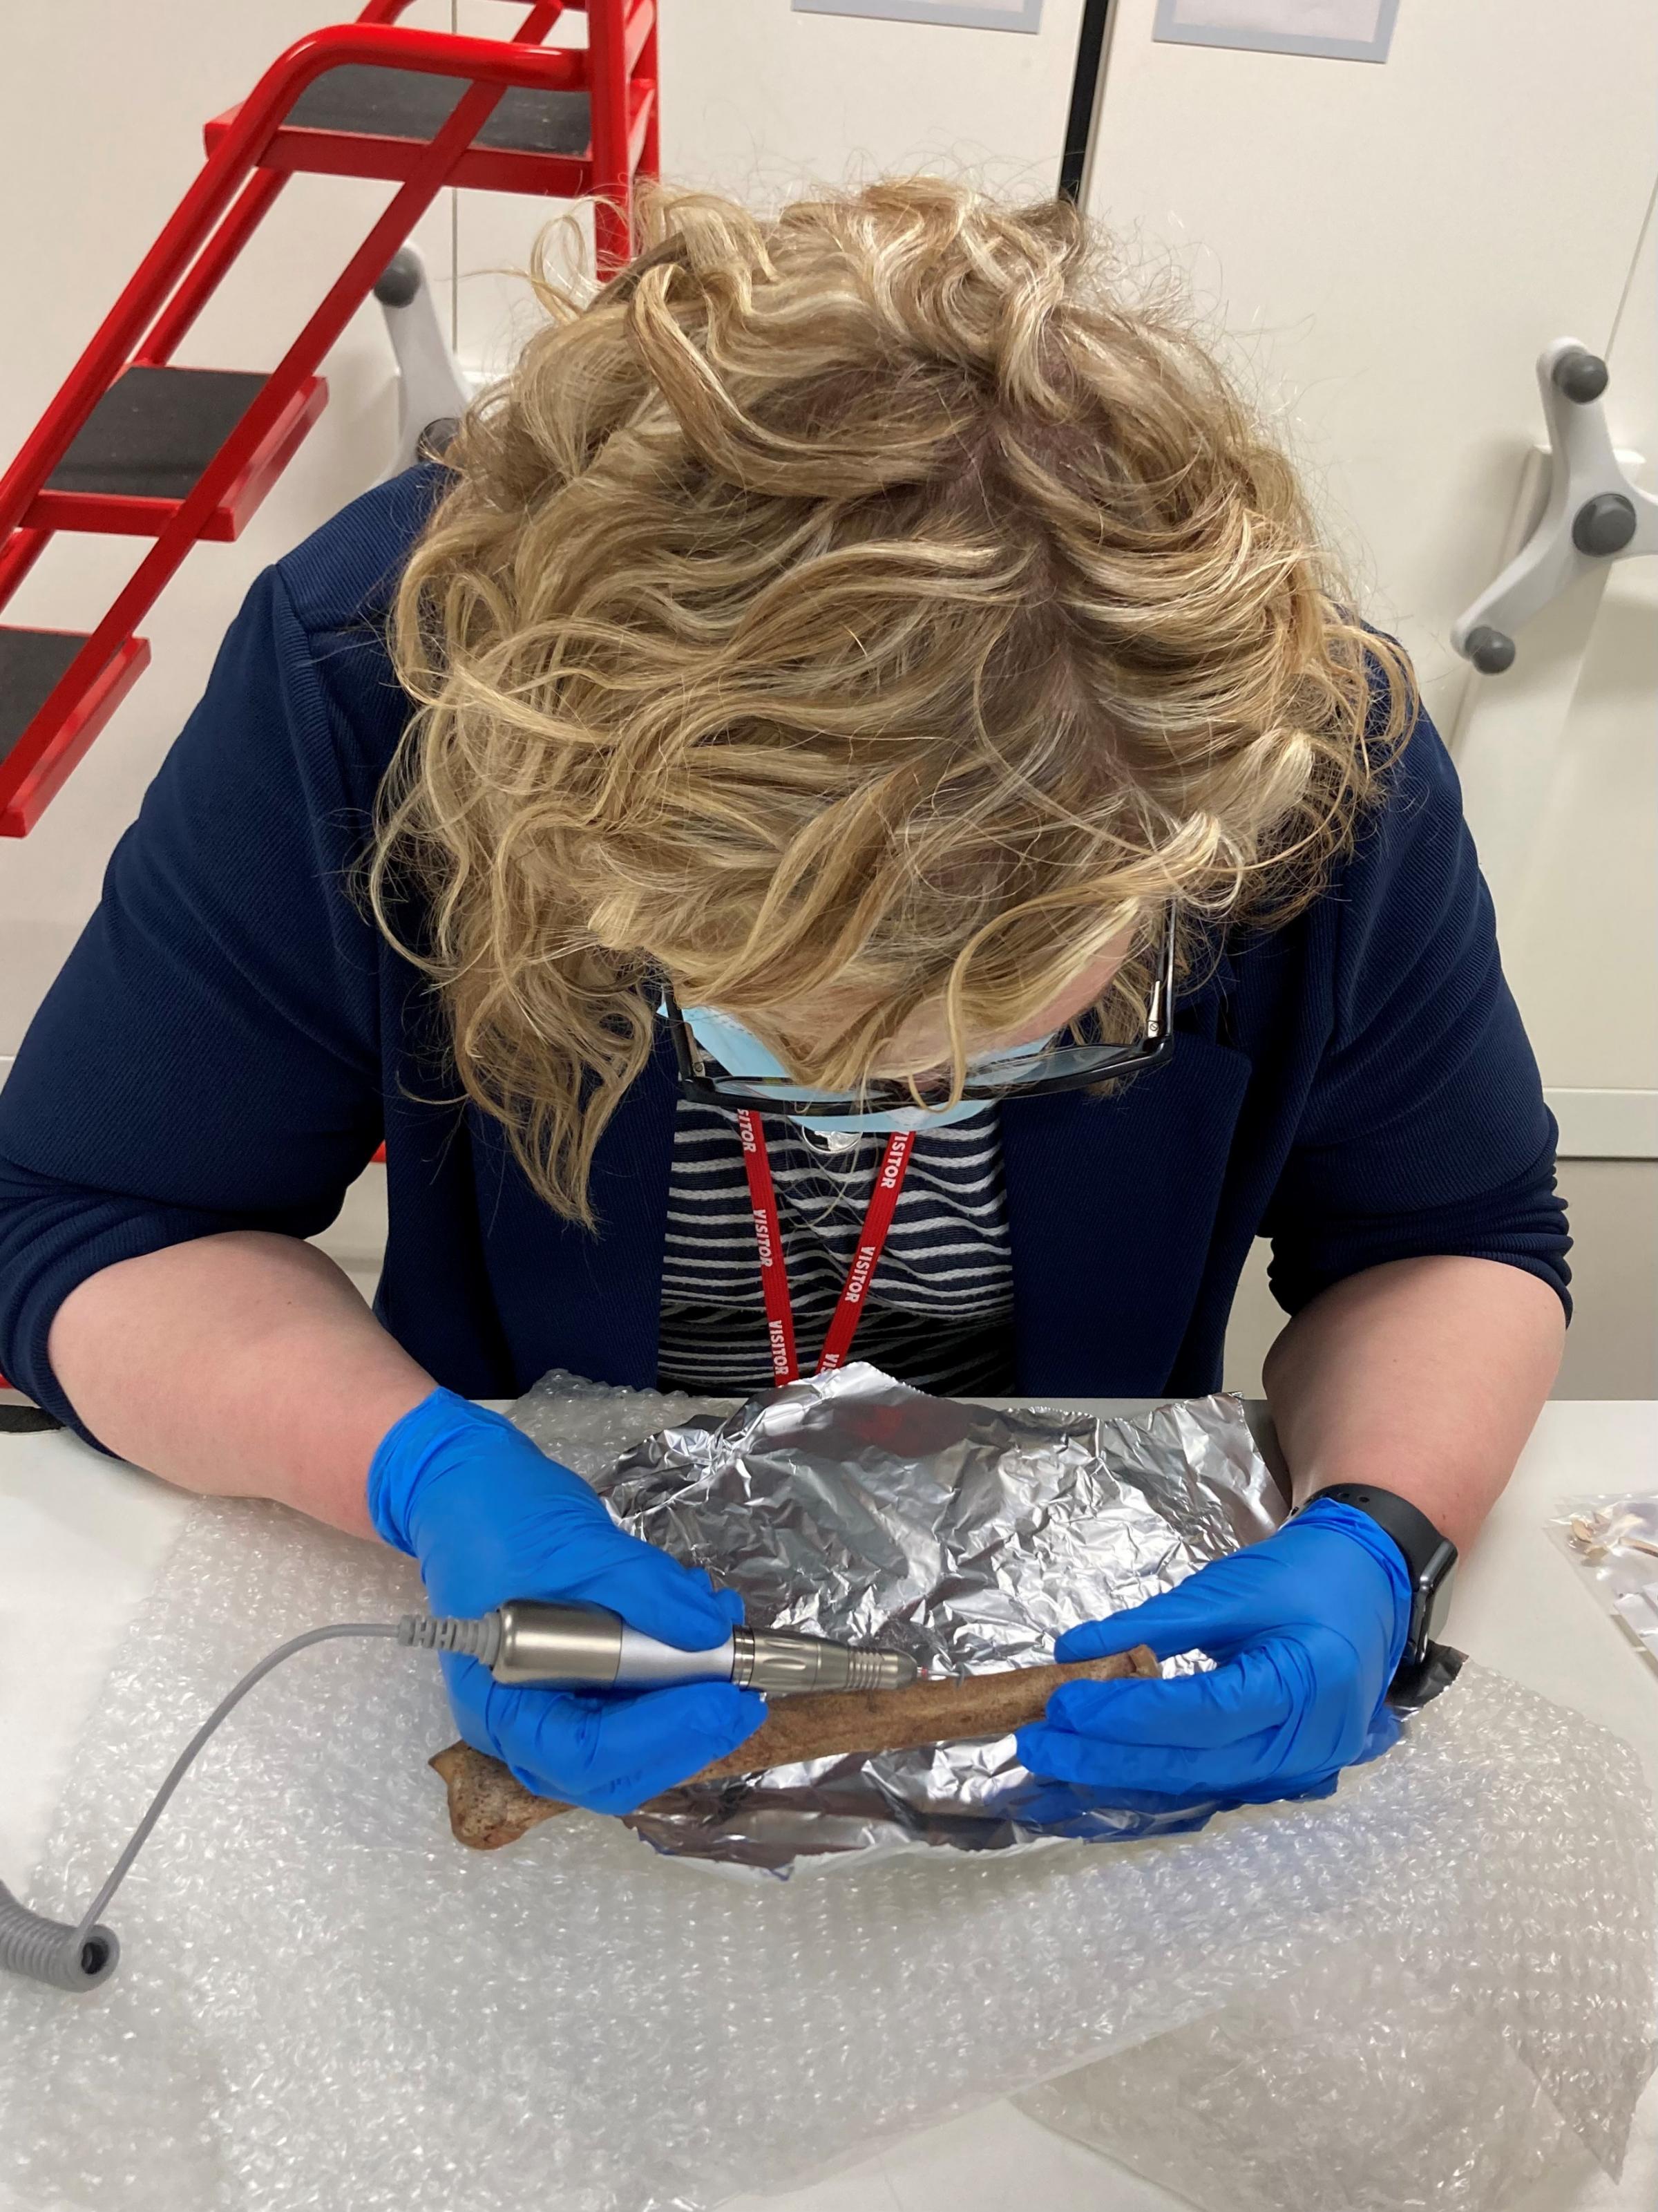 Kate Britton sampling a reindeer metacarpal (limb bone) to undertake radiocarbon dating. Radiocarbon dating, a method utilised by archaeologists to accurately date archaeological bones and other materials, will form a significant part of the PALaEoScot